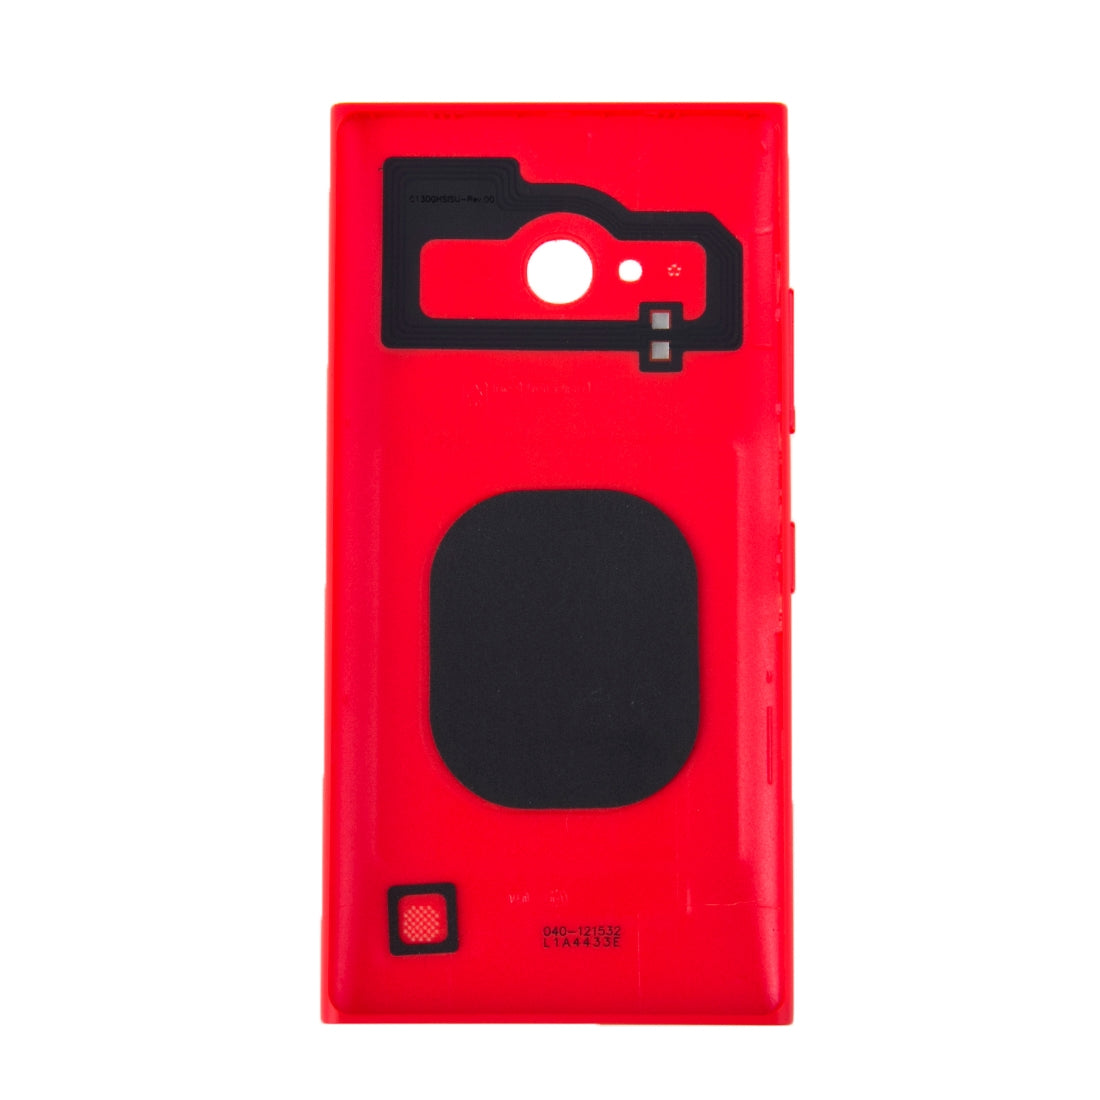 Battery Cover Back Cover Nokia Lumia 735 Red